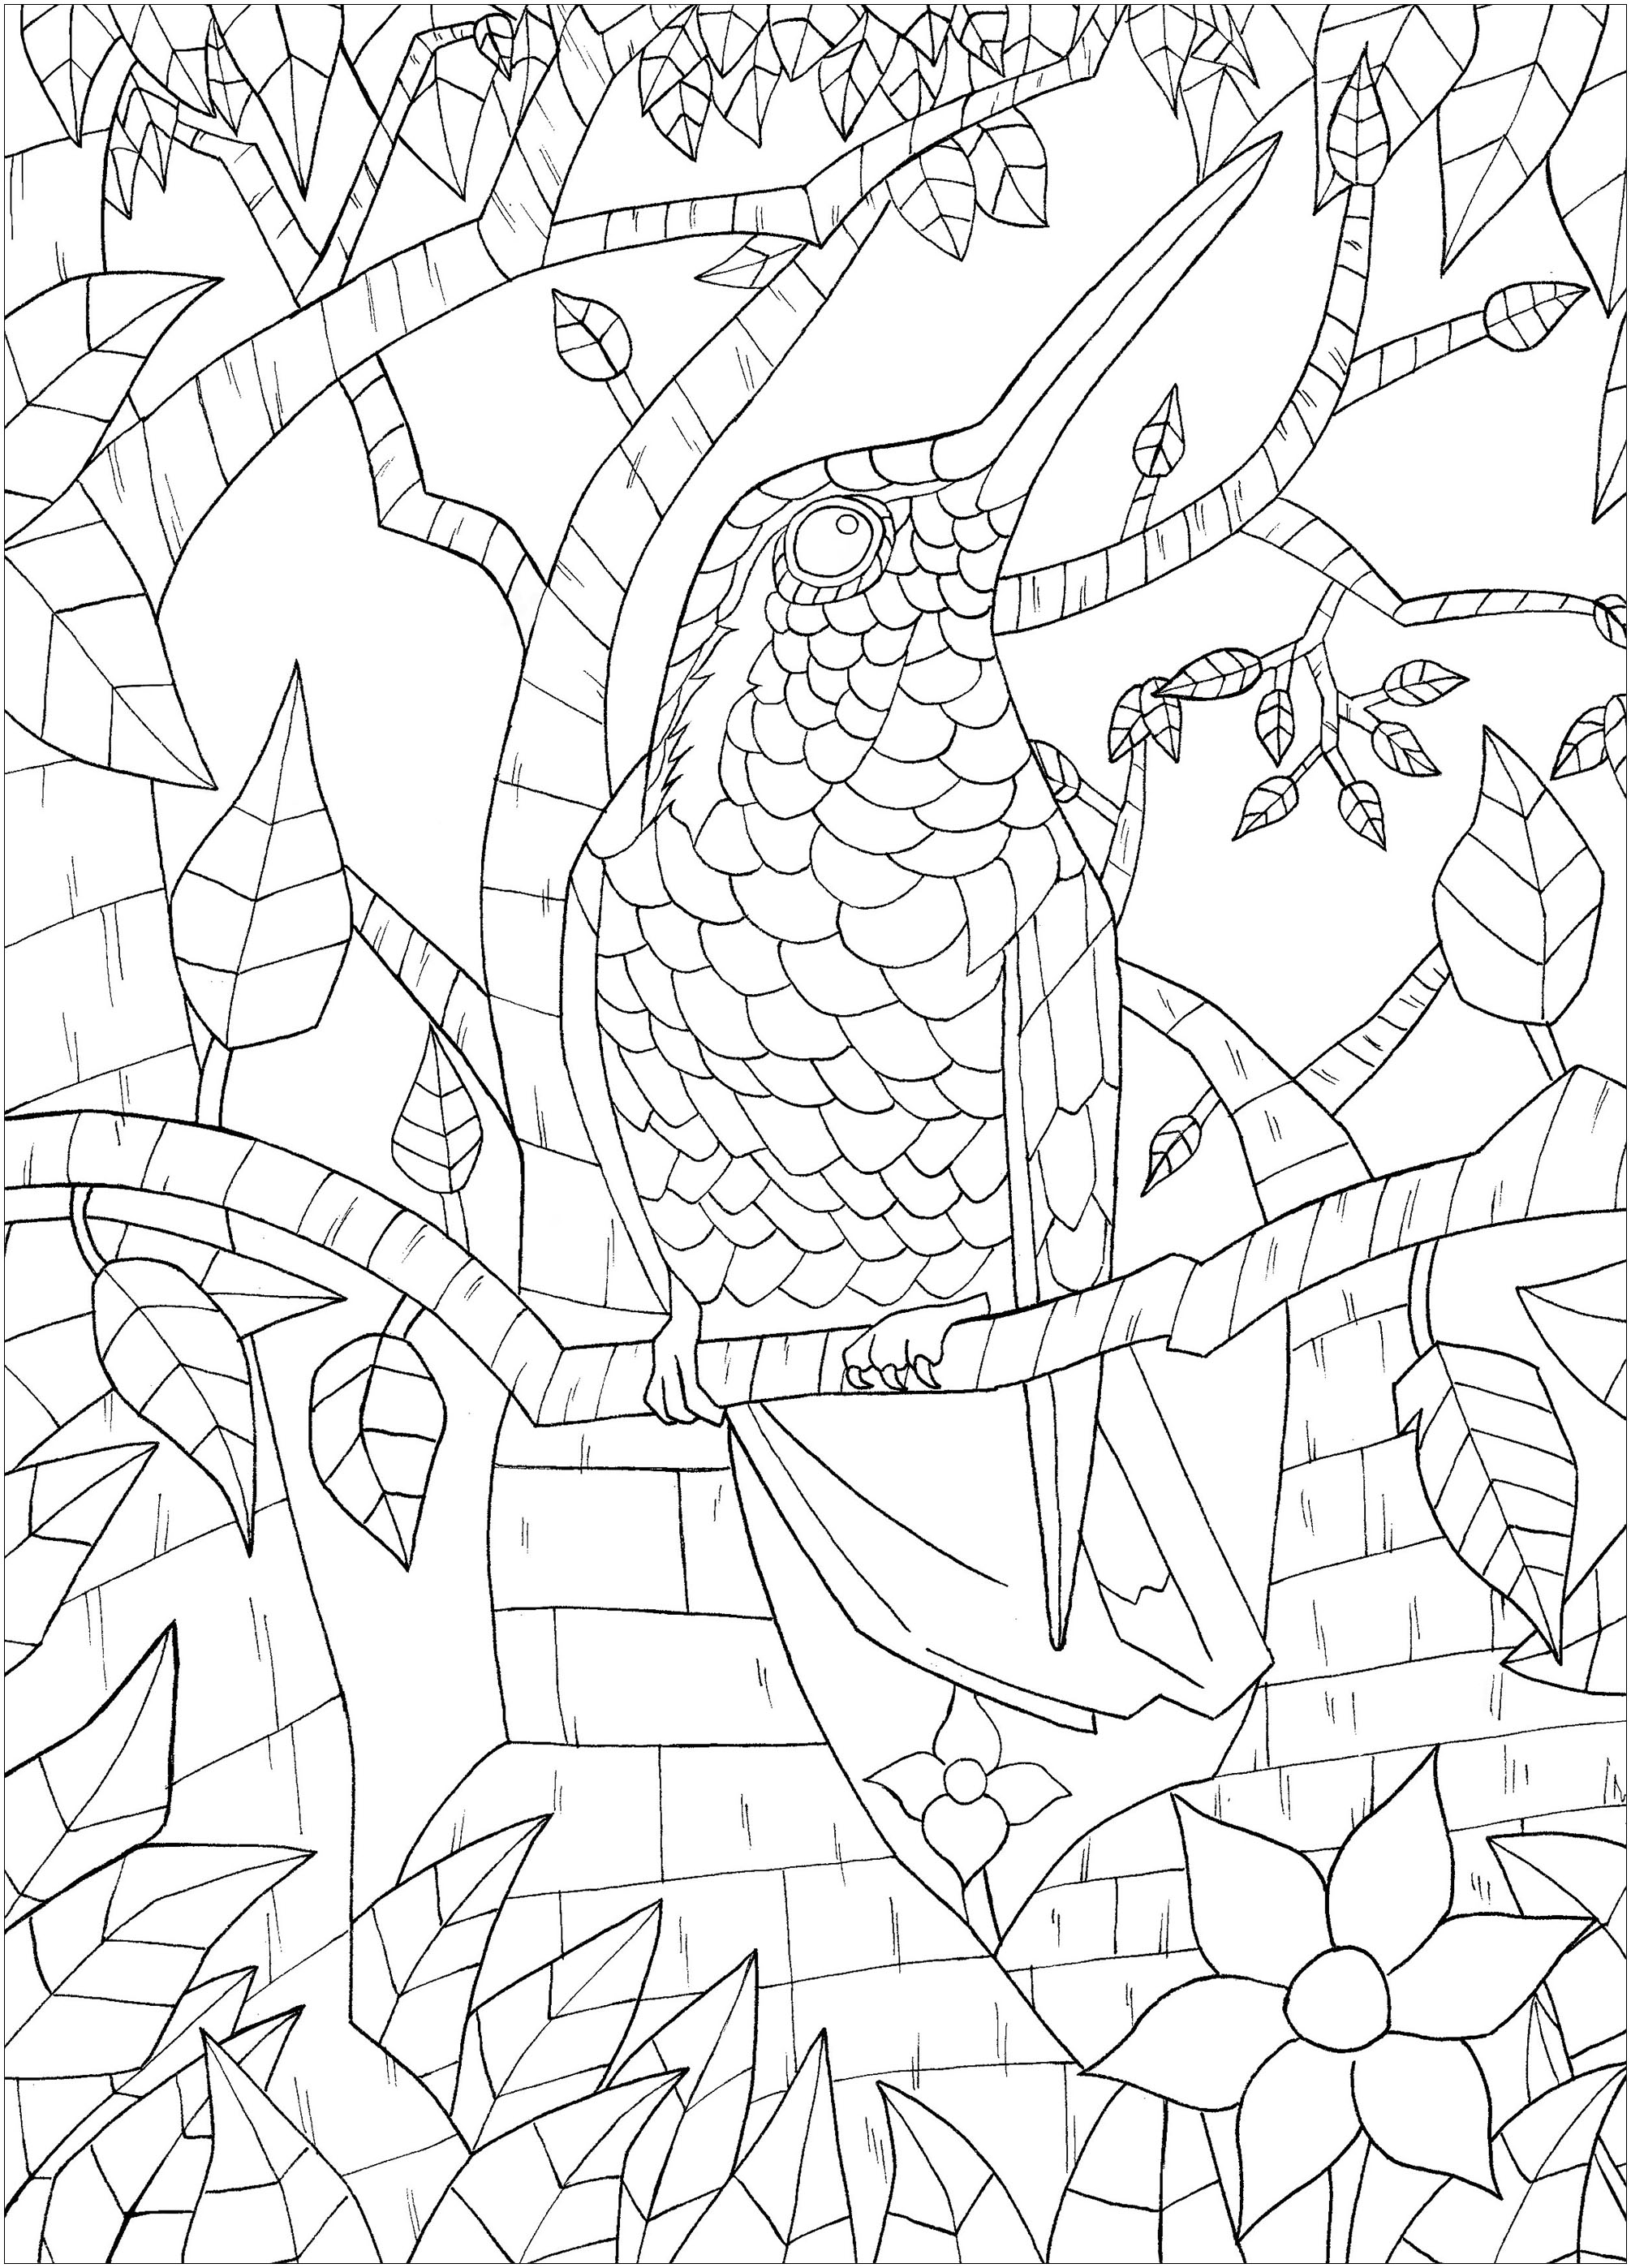 Bird on branch - Birds Adult Coloring Pages